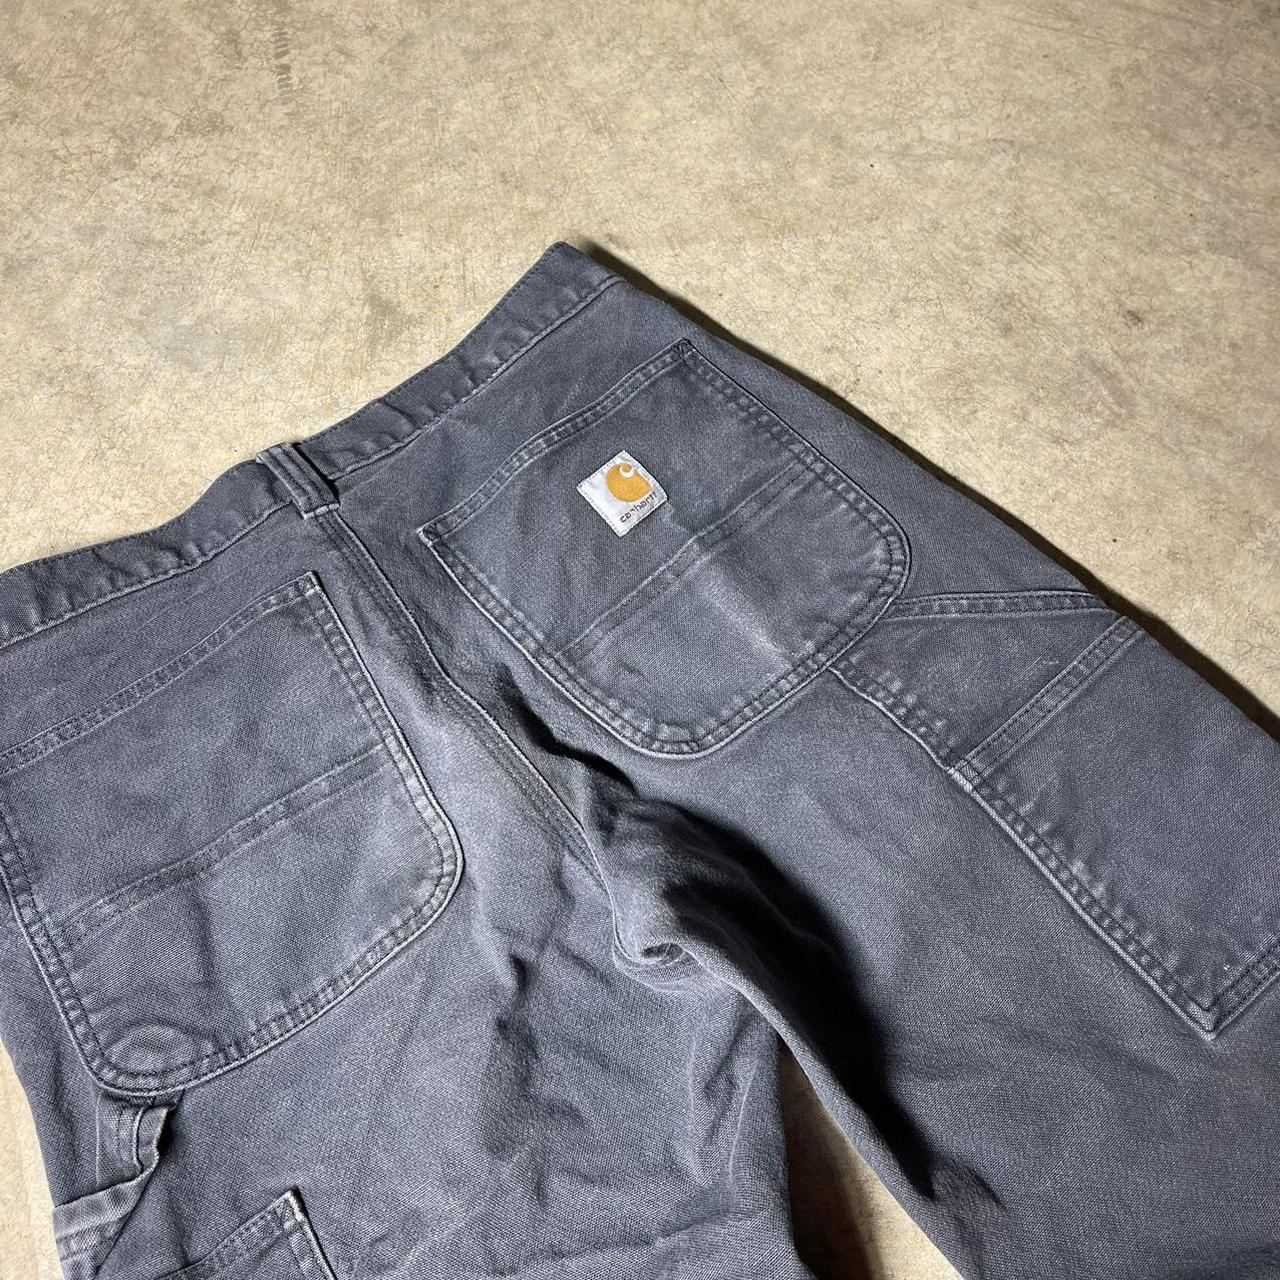 Carhartt double knees Relaxed fit Size 30x32 - Depop